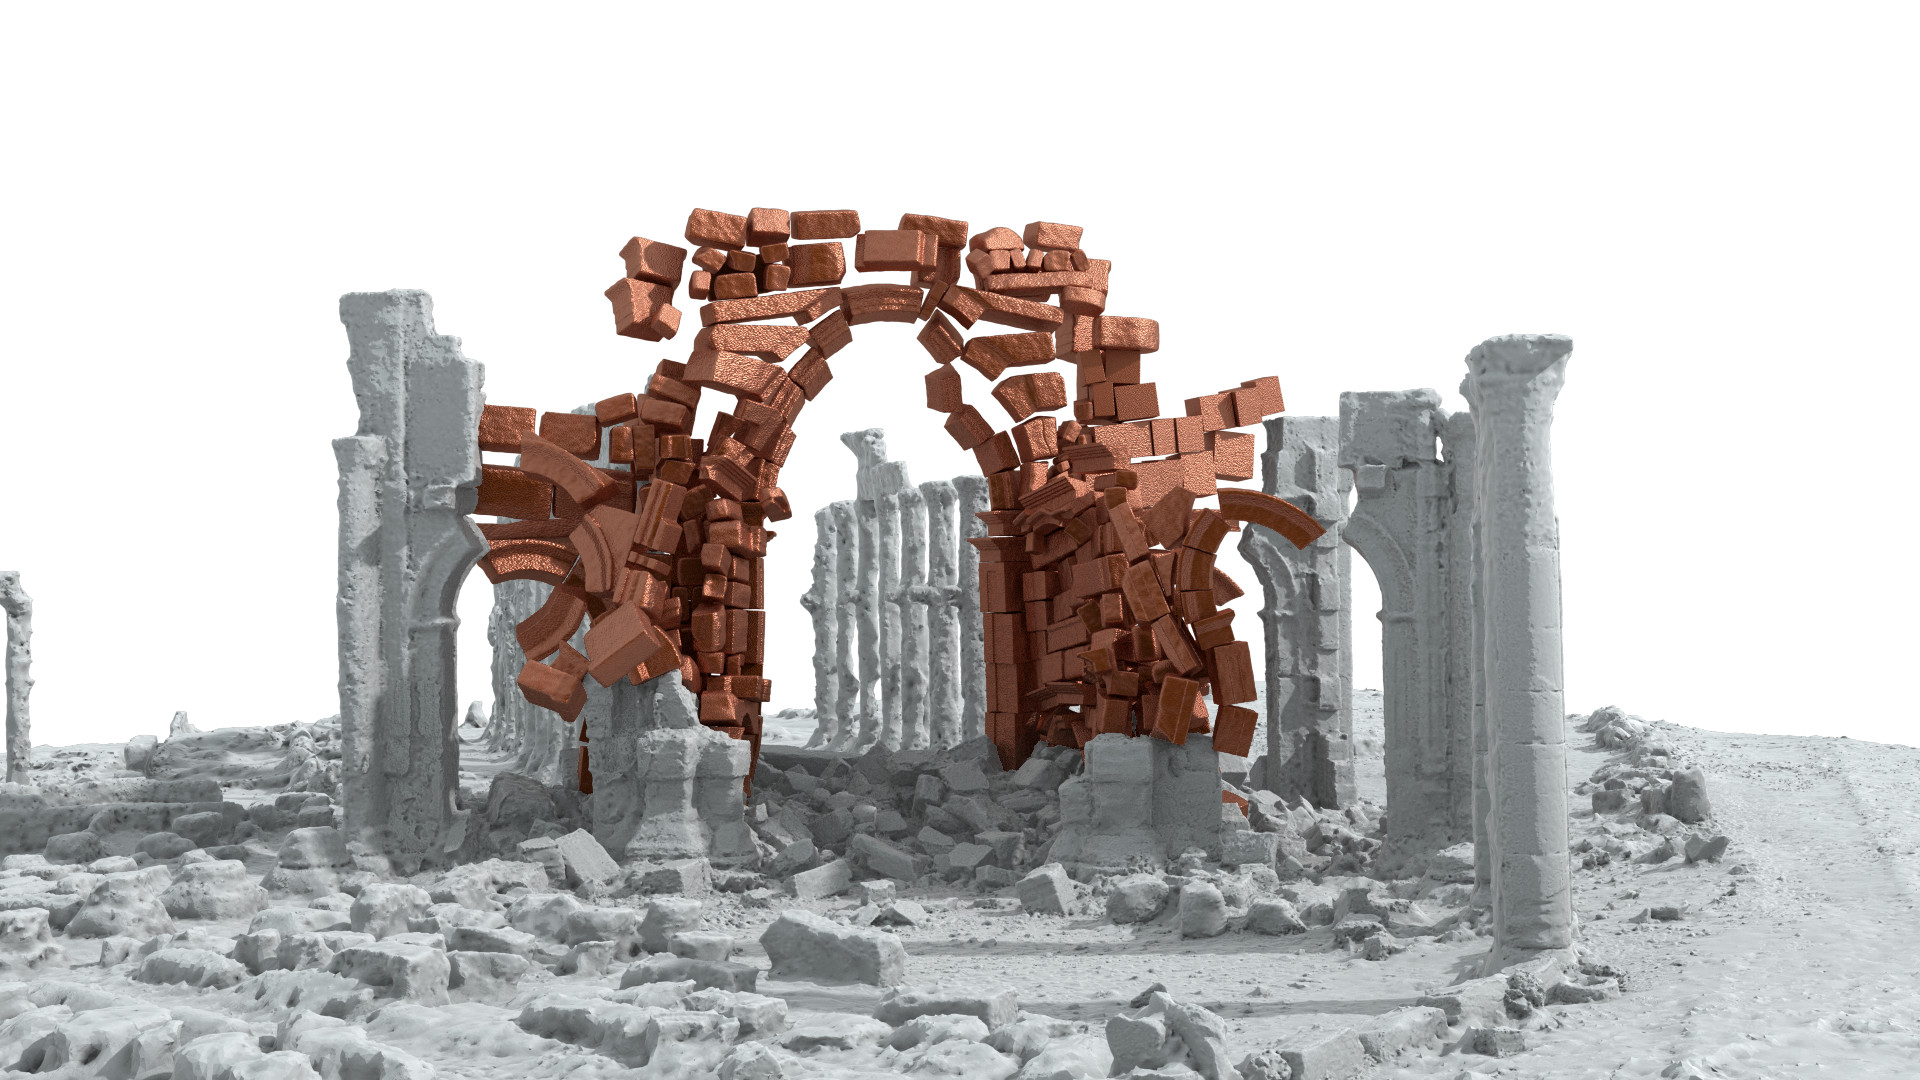 3D model of historic monumental arches